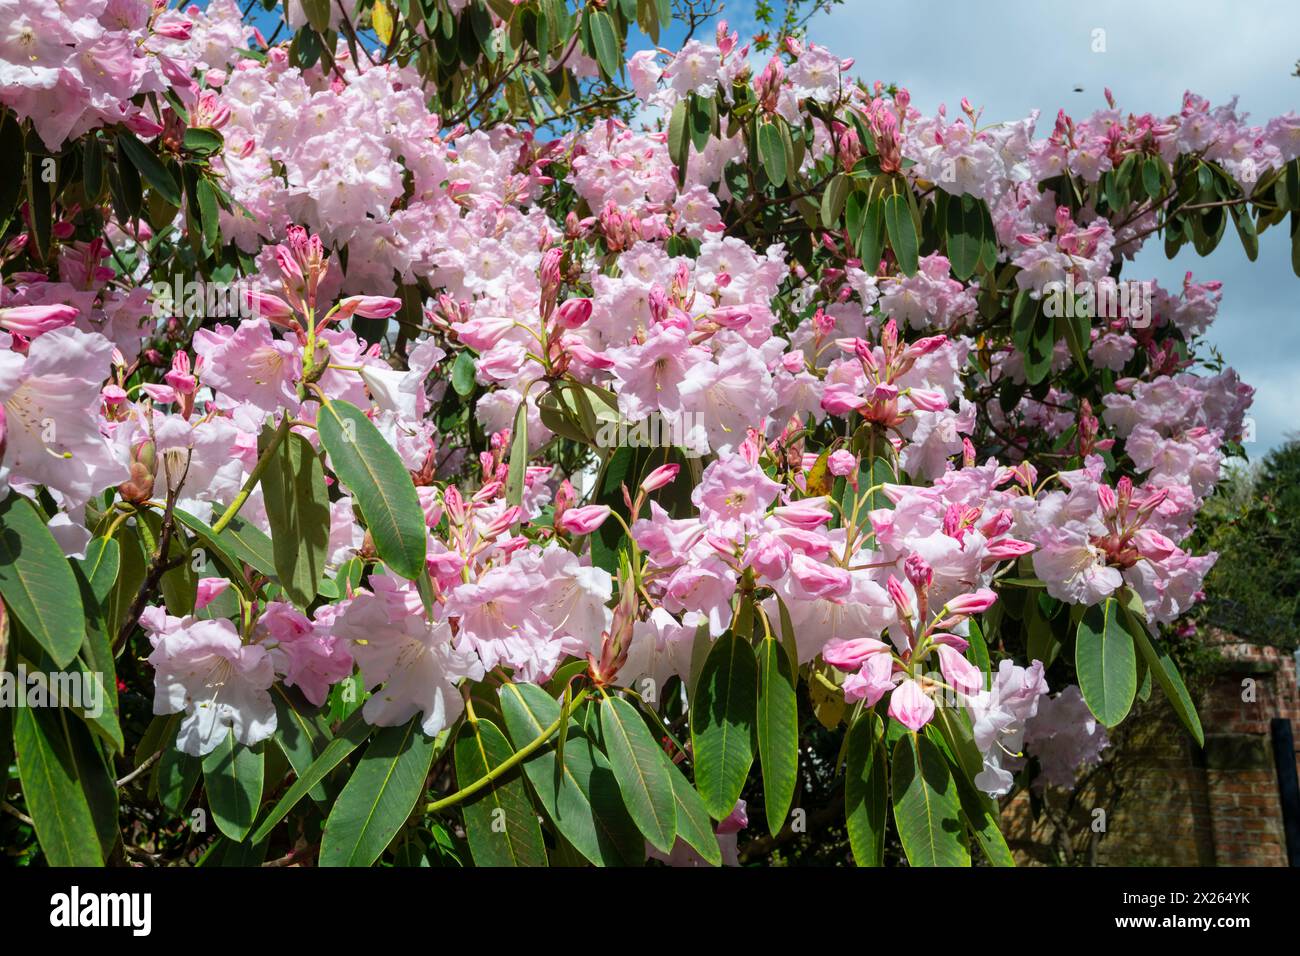 Large Rhododendron with beautiful pale pink flowers at Fletcher Moss botanical garden at Didsbury in South Manchester. Stock Photo